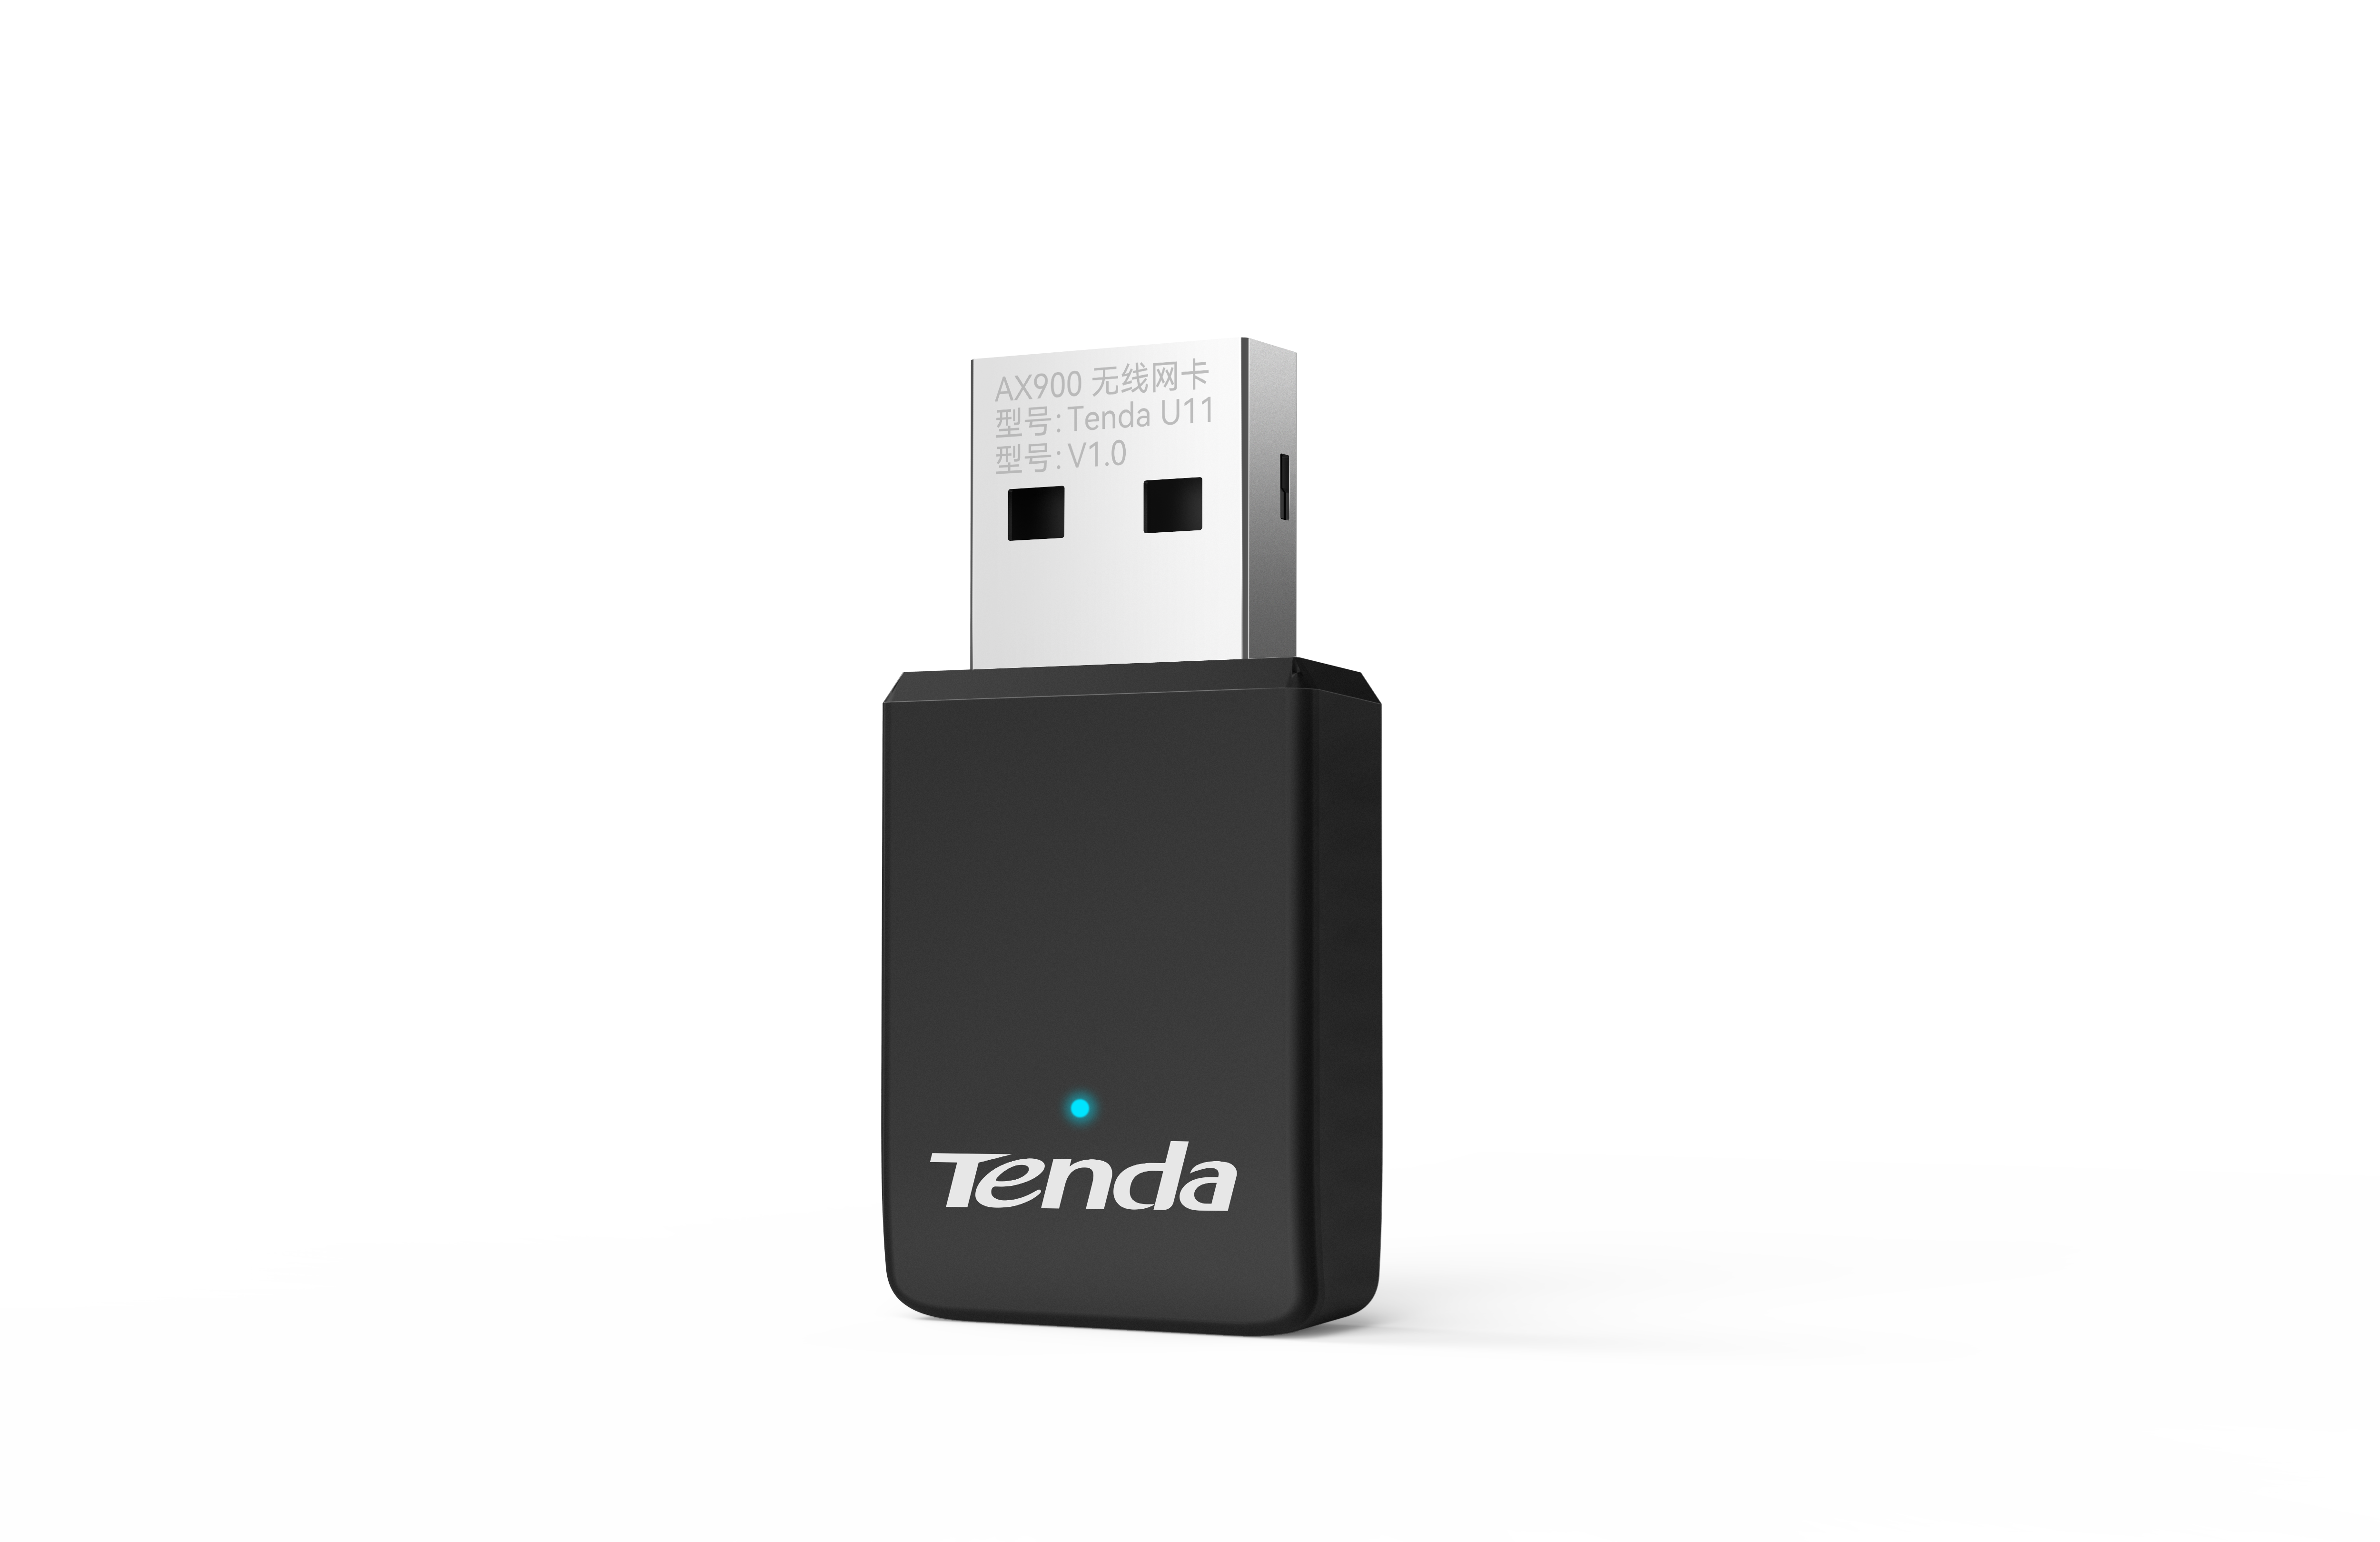 TENDA AX900 DUAL BAND WIFI 6 USB 2.0 ADAPTER WITH 5GHz UPTO 601Mbps 2.4GHz UPTO 286Mbps